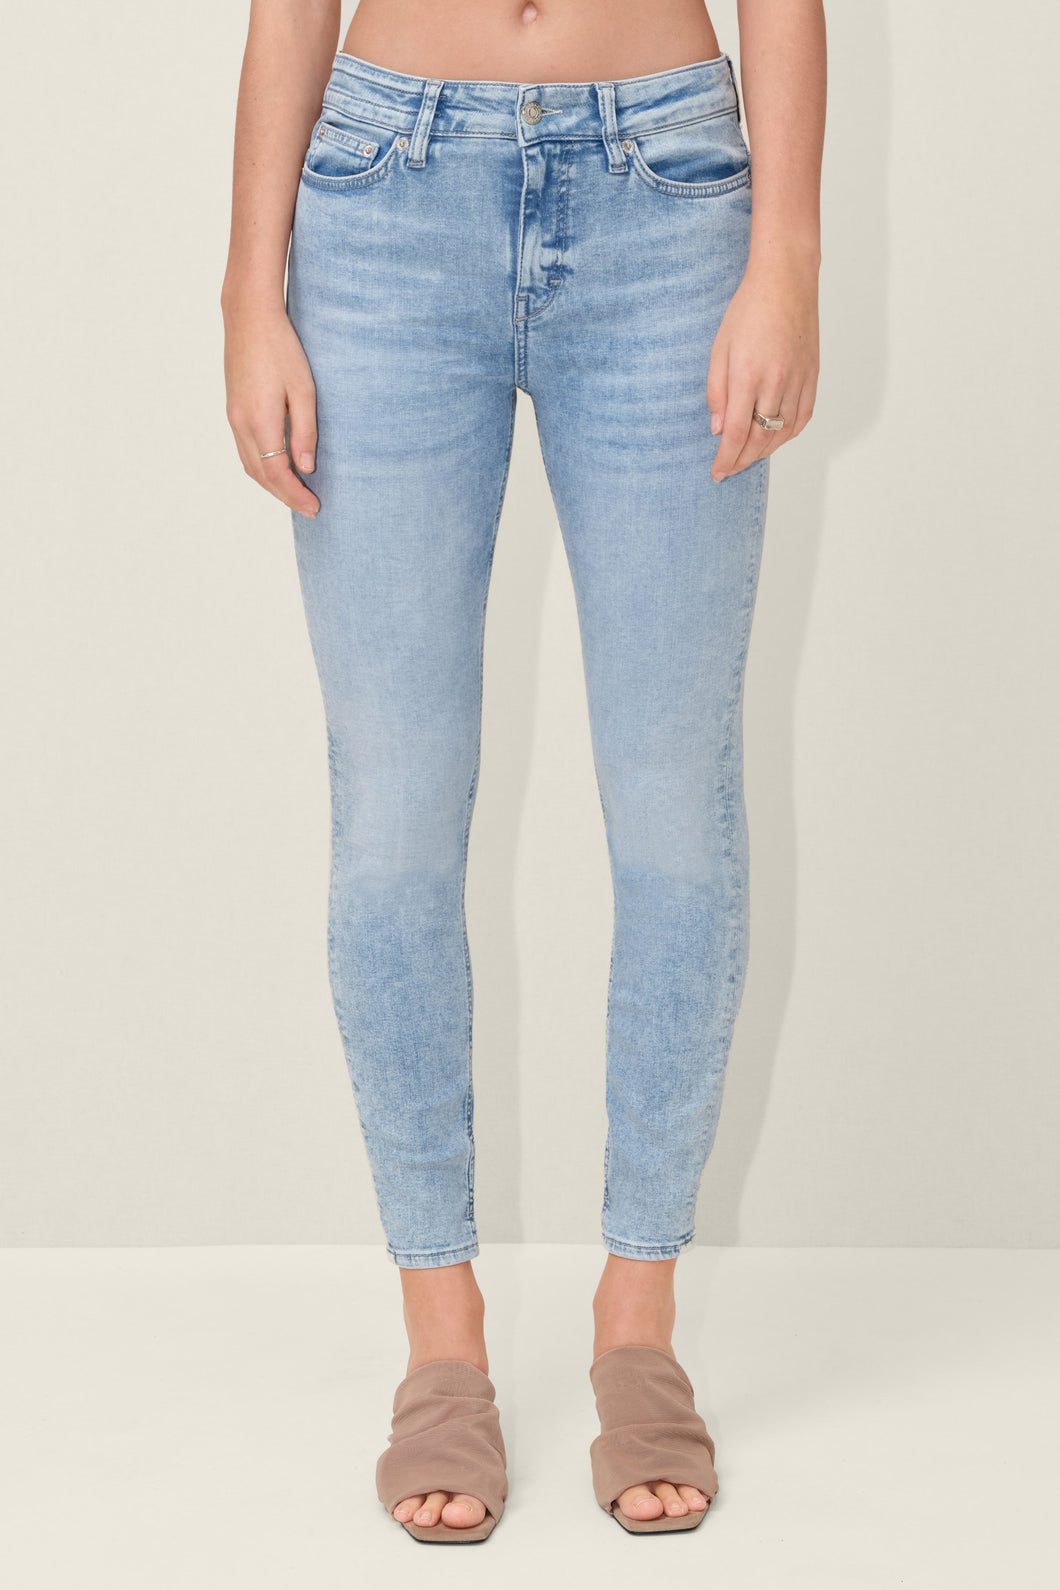 Drykorn Need Jeans Blue 260192 3700